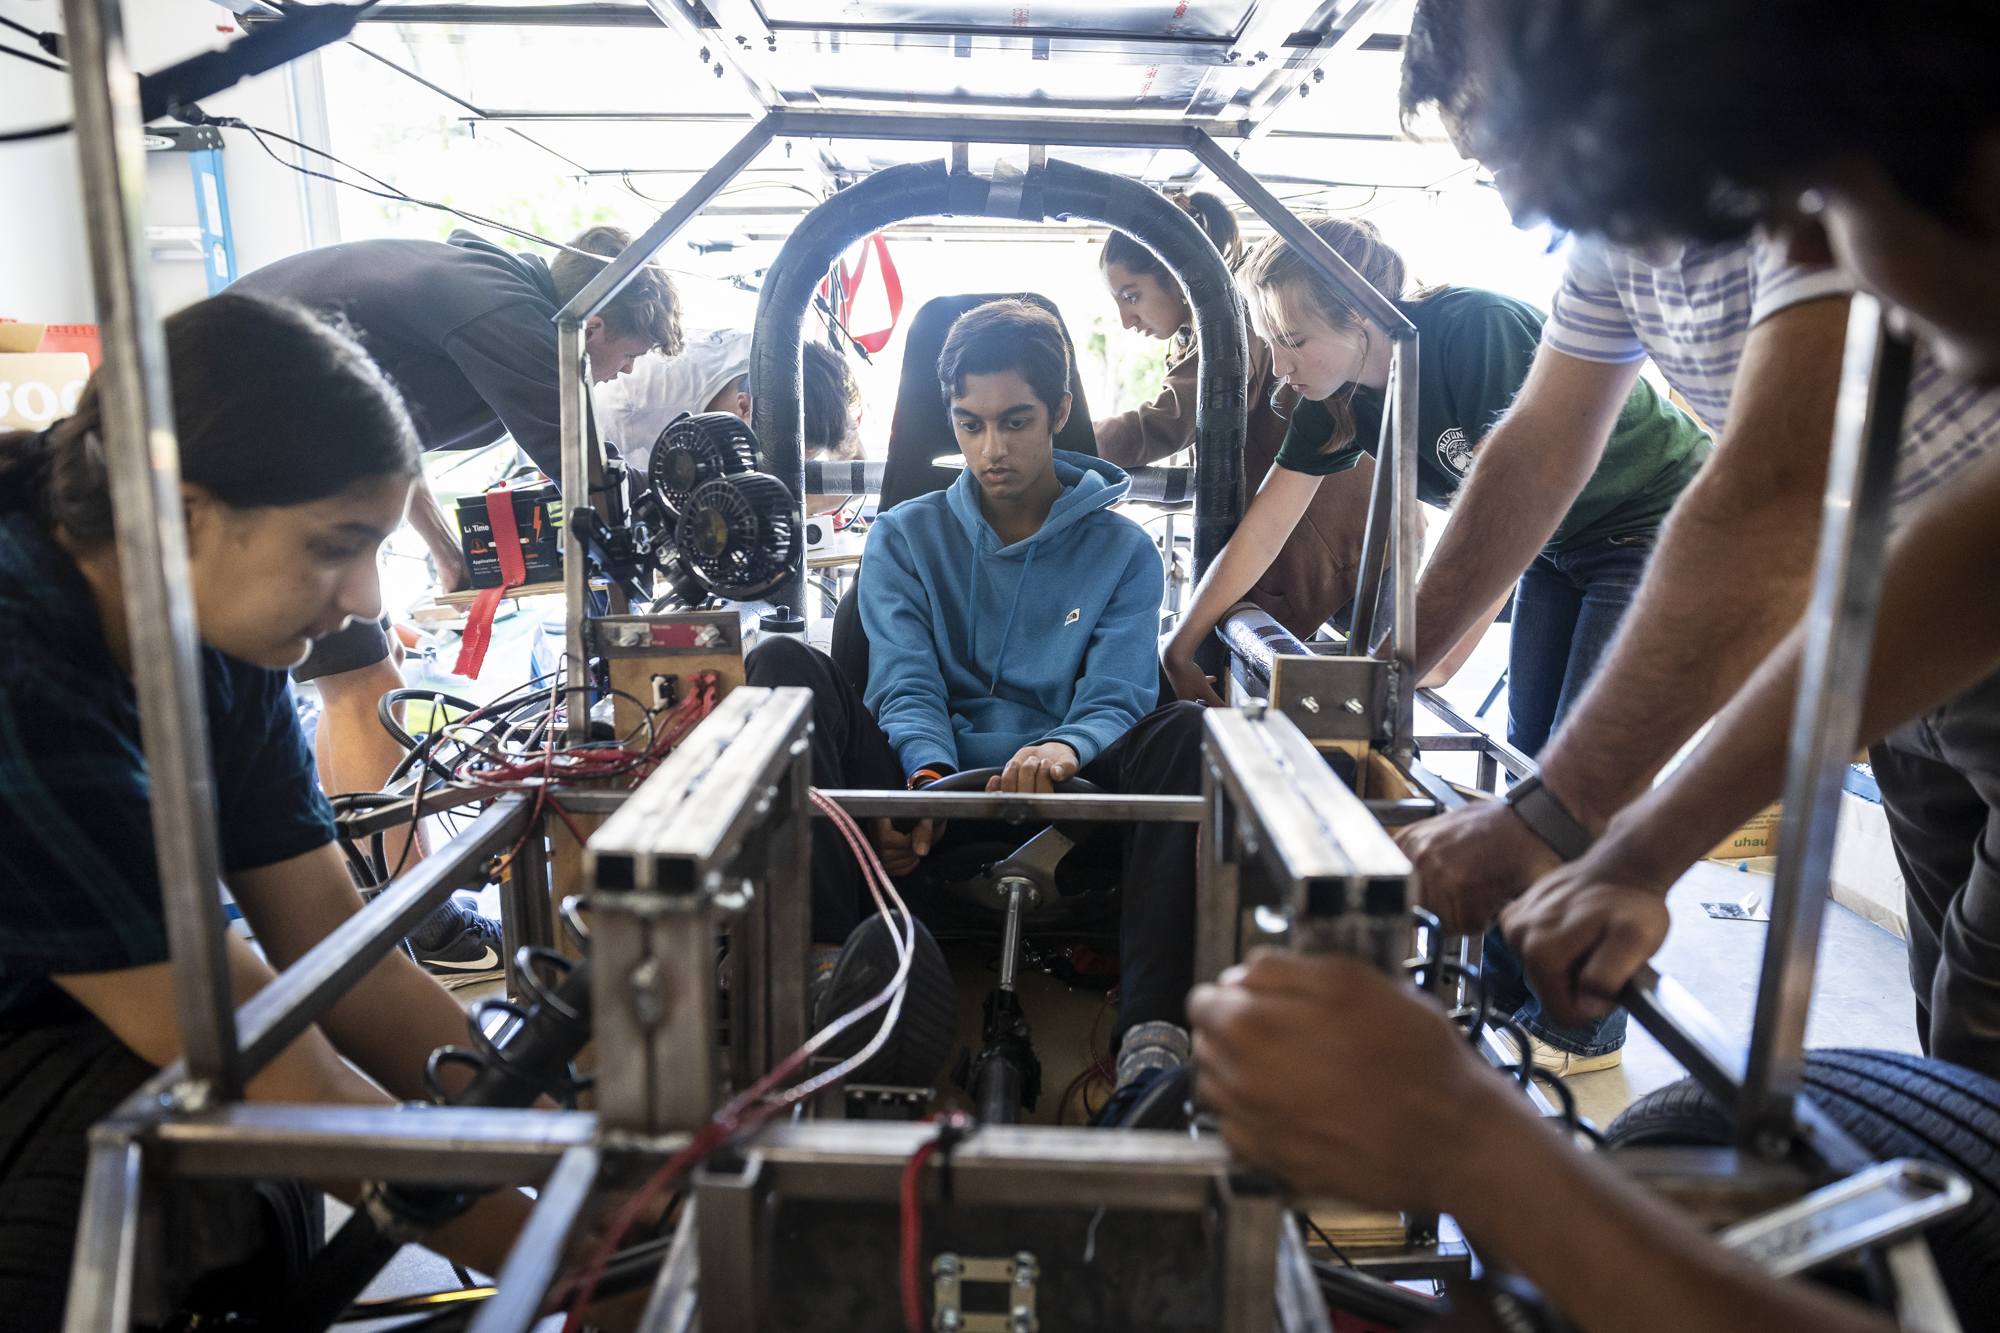 An East Indian high school student sits in the middle of a metallic frame as other students work around him.